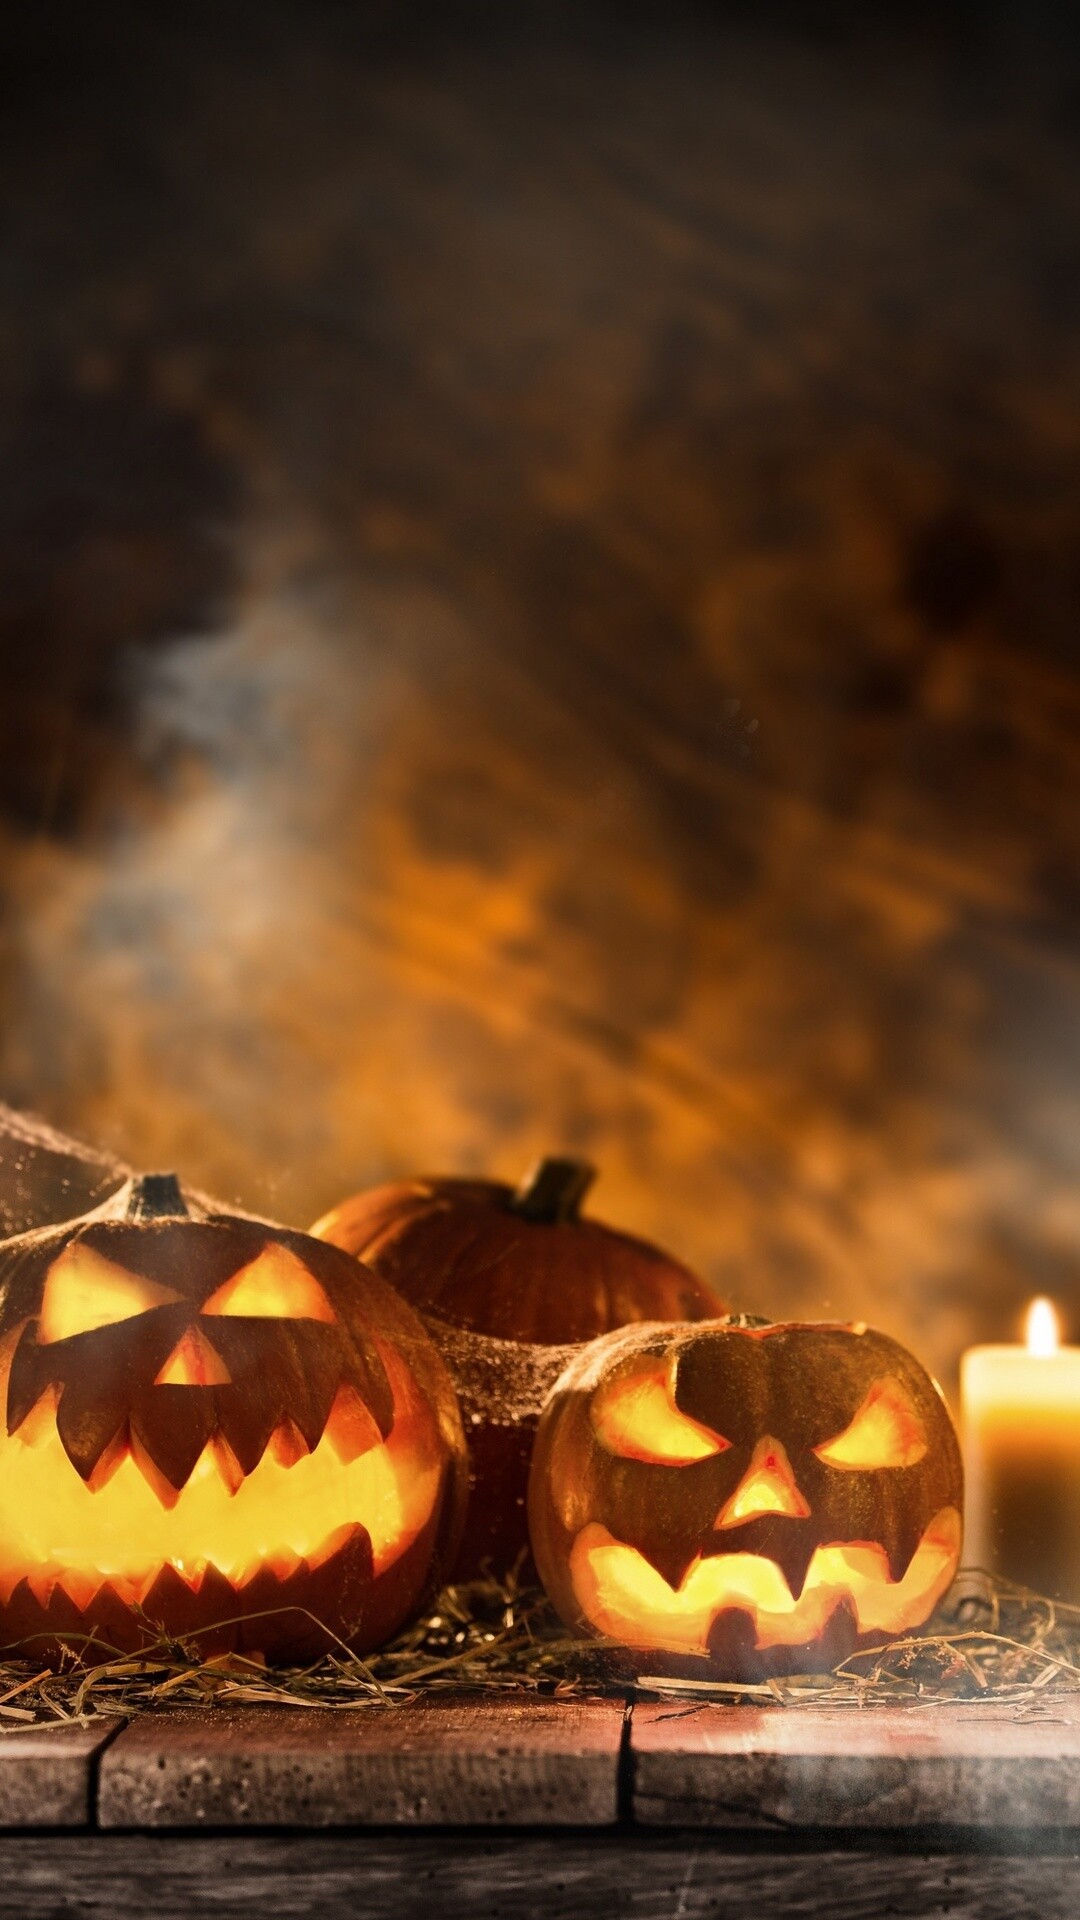 Halloween: Celebration of the spirits of the dead, Candle and pumpkins, Jack-o'-lantern. 1080x1920 Full HD Wallpaper.